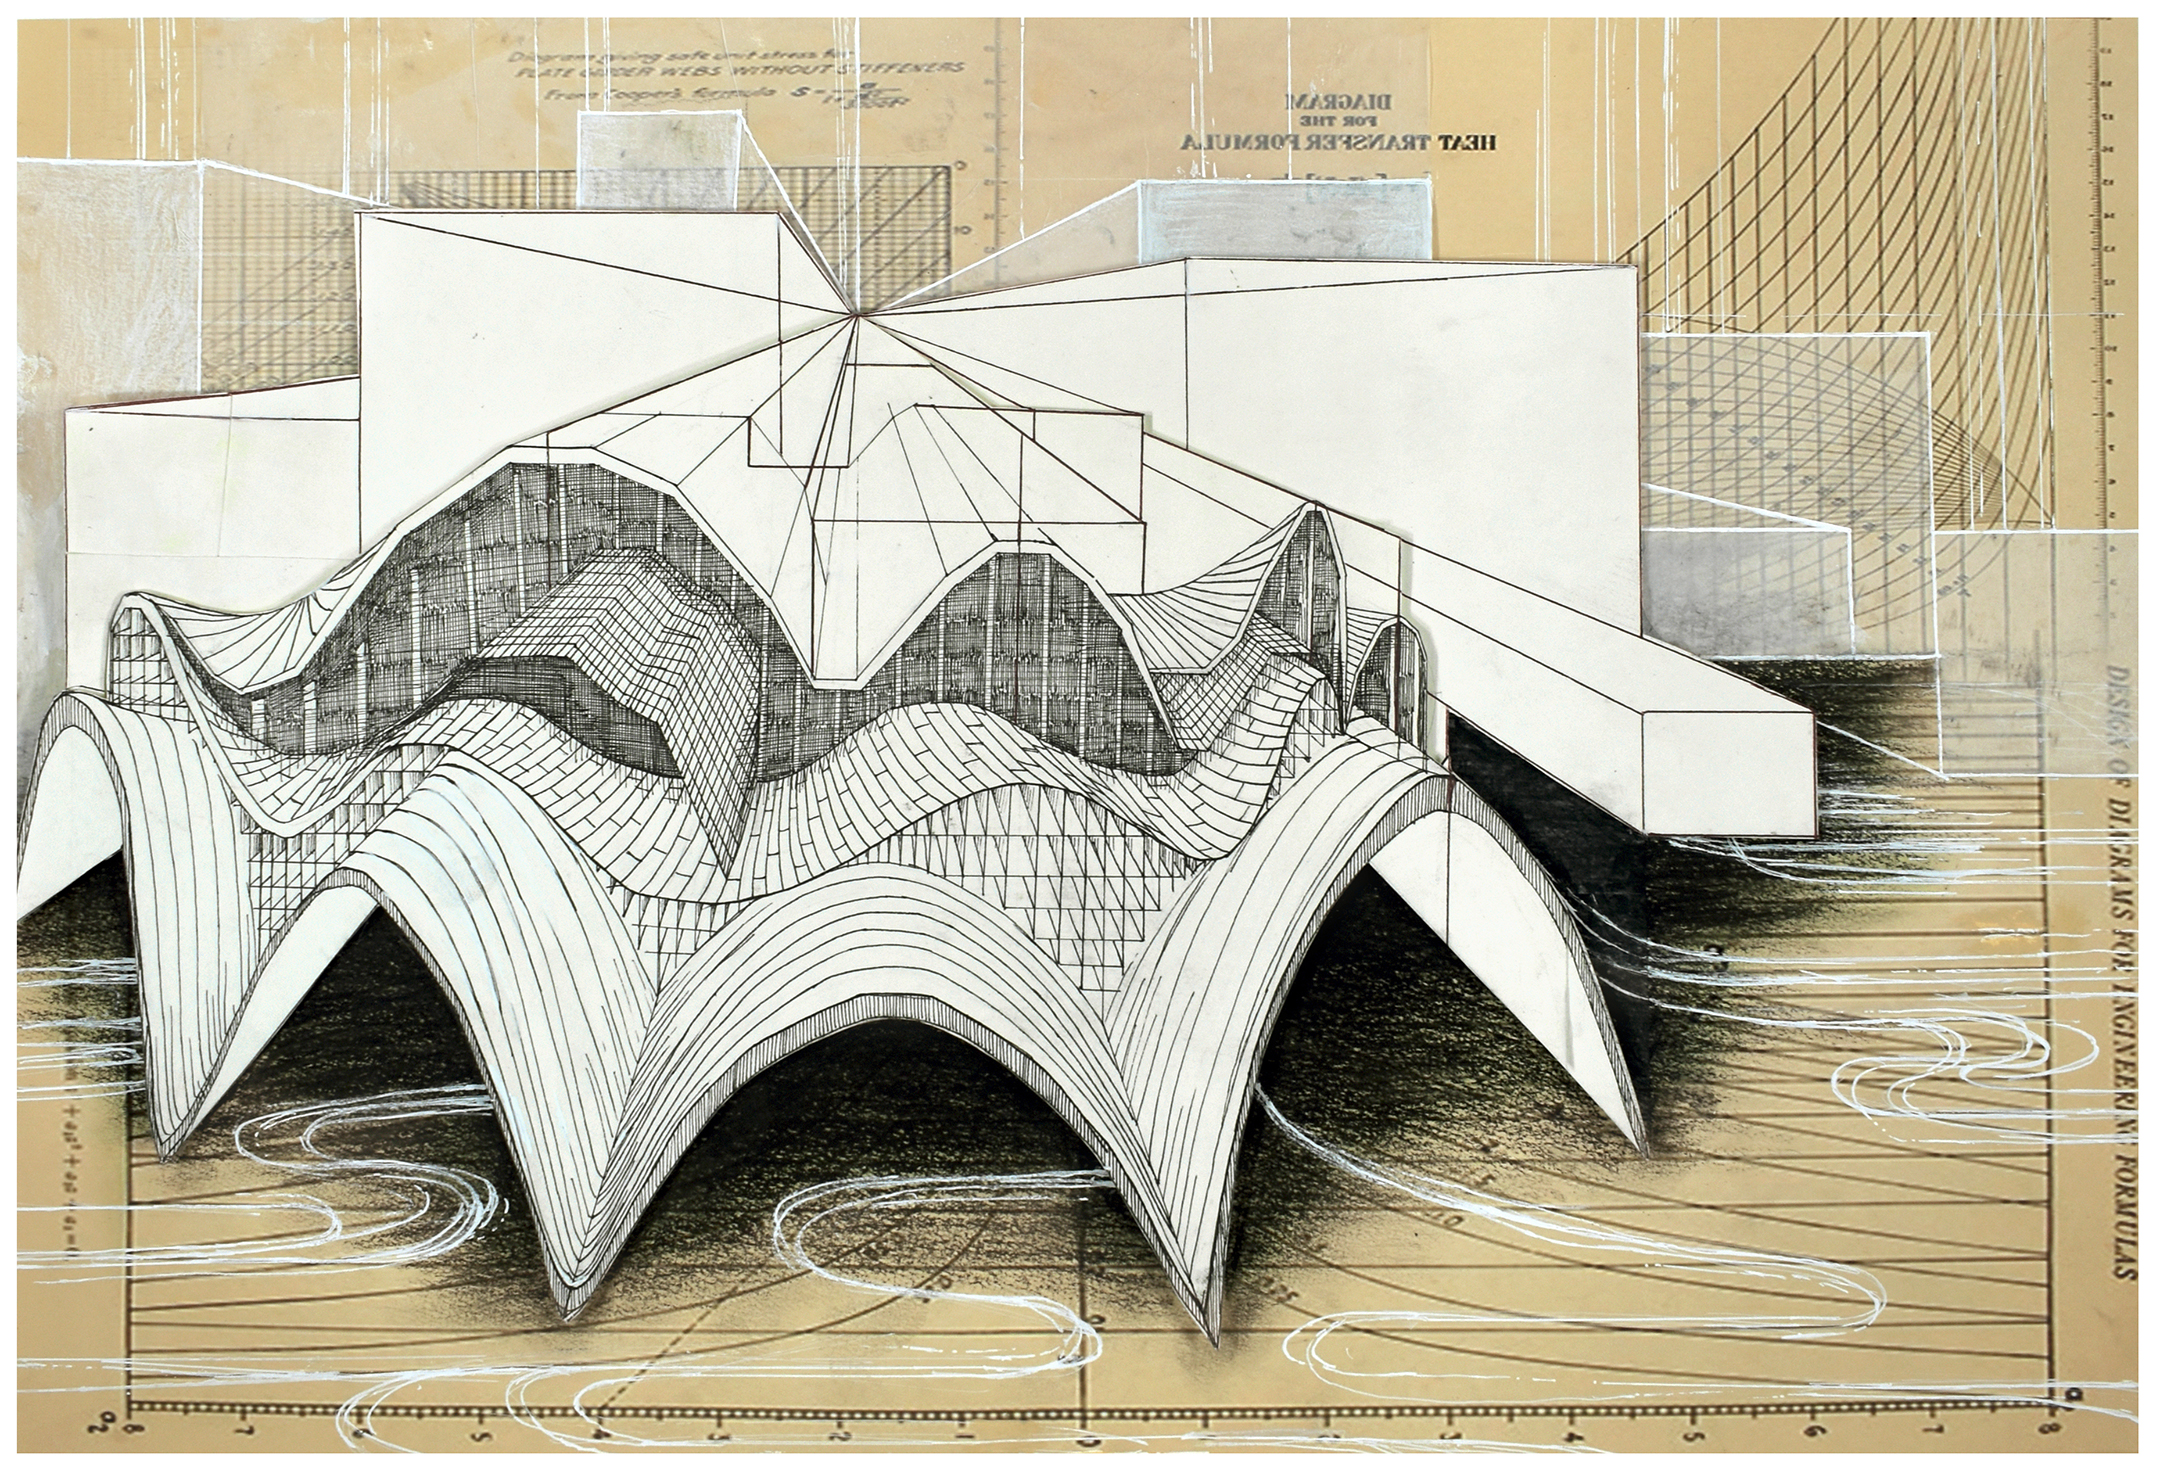 Black and white sketch of oyster-shell-like architecture